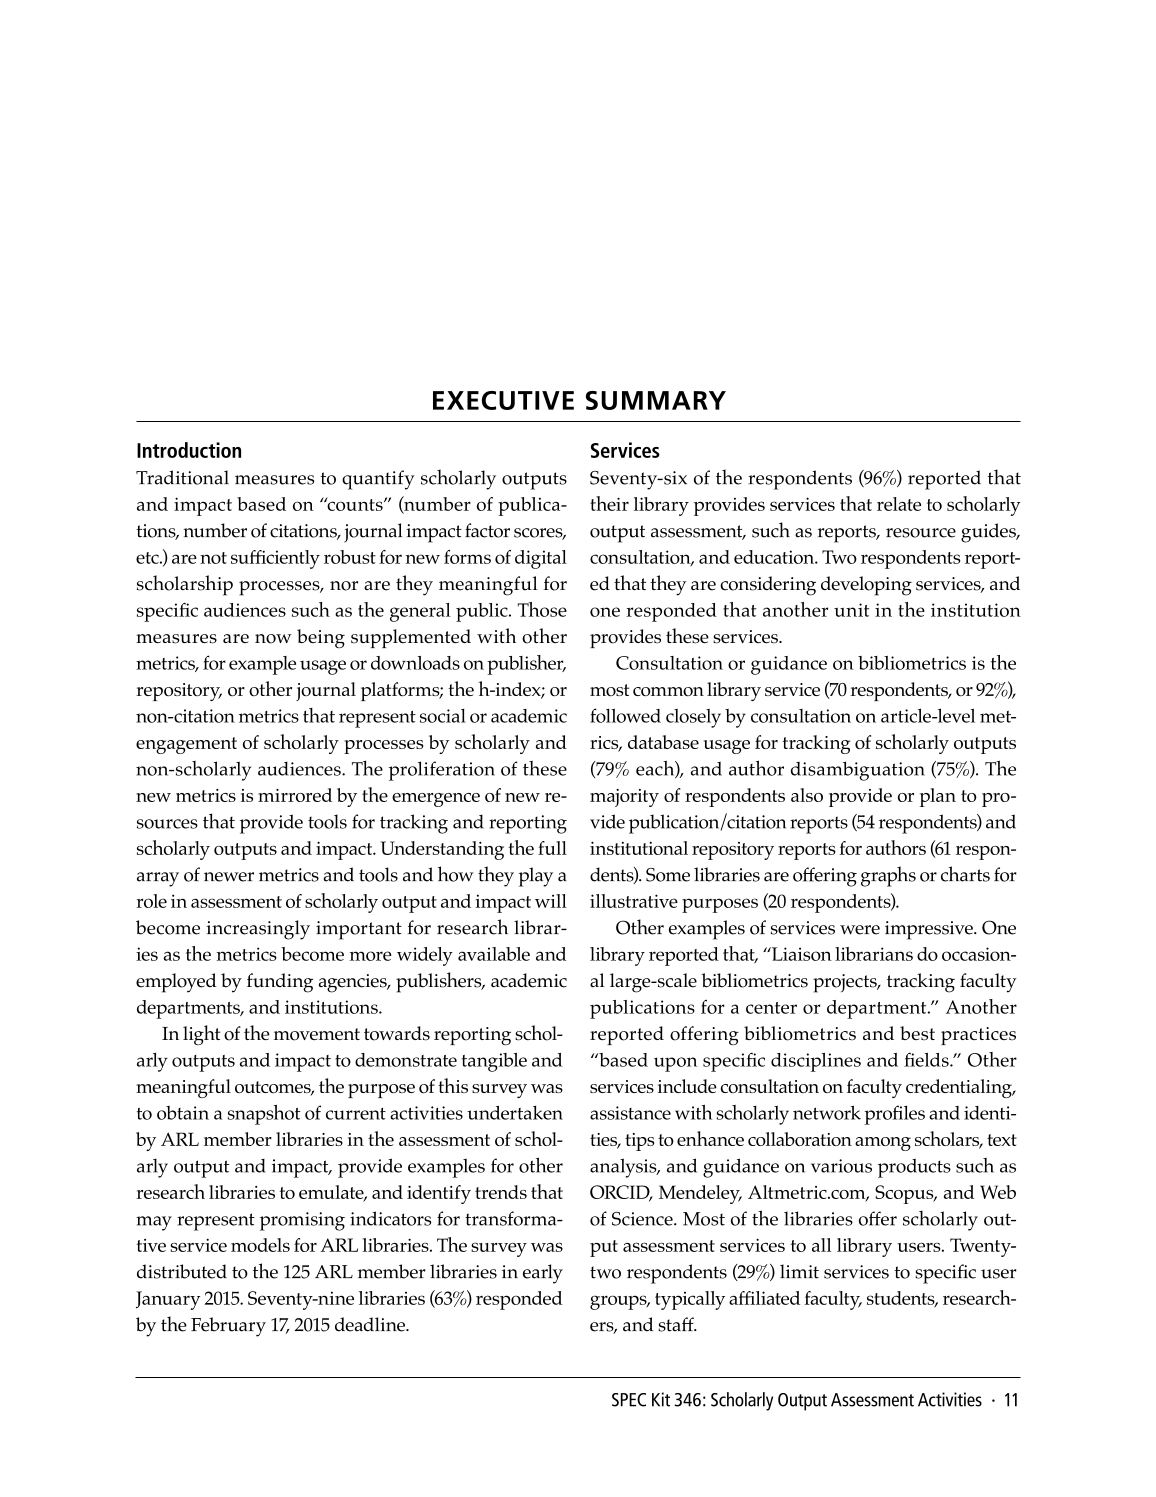 SPEC Kit 346: Scholarly Output Assessment Activities (May 2015) page 11